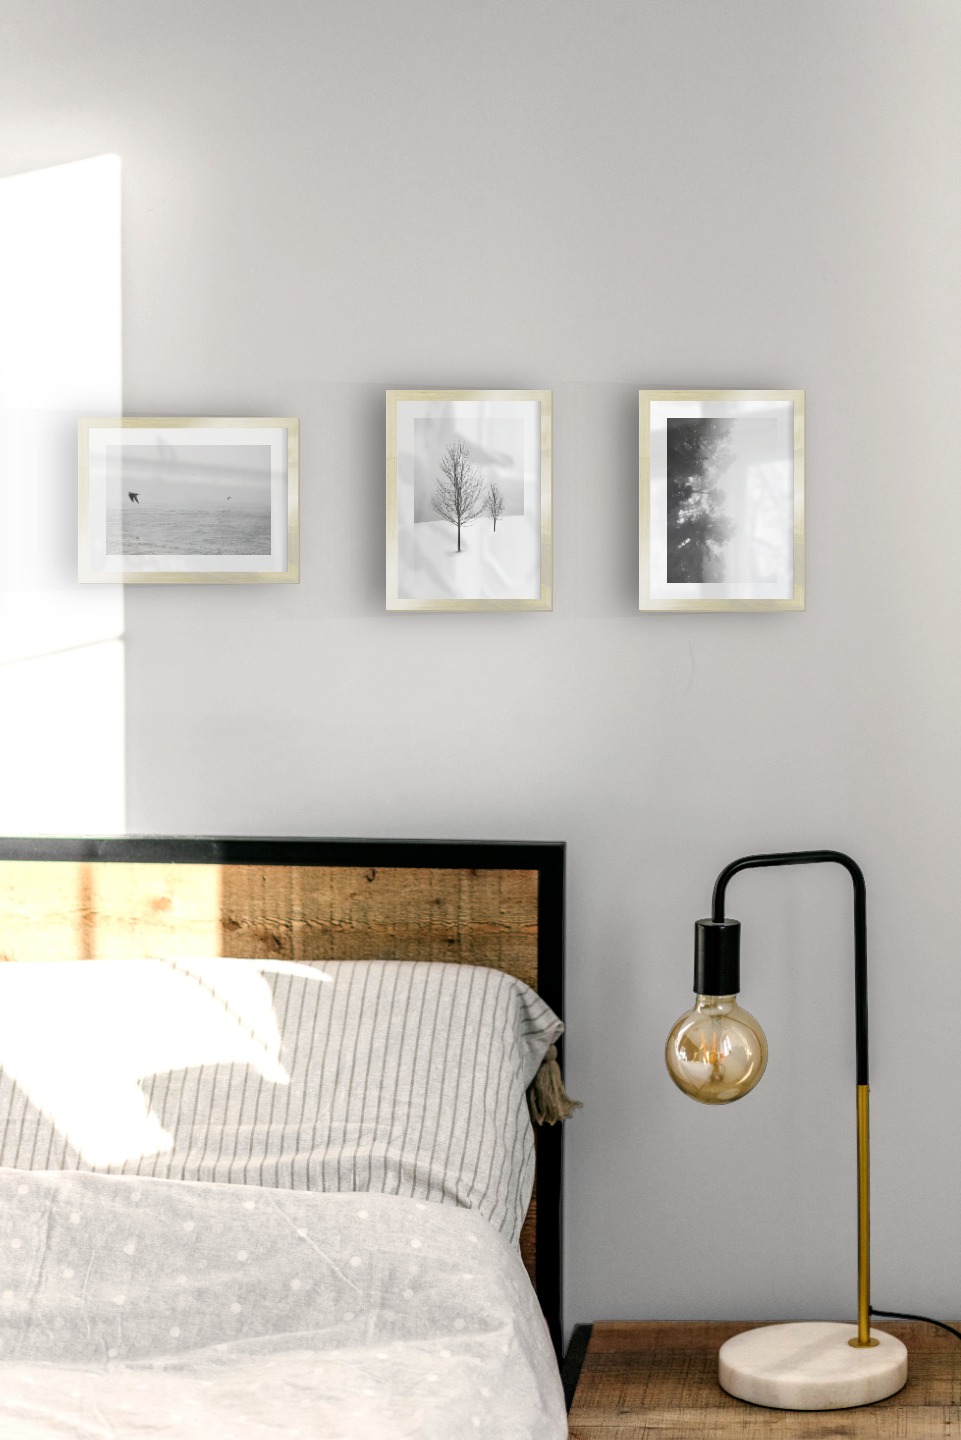 Gallery wall with picture frames in gold in sizes 13x18 with prints "Tall trees", "Birds over the sea", "Trees in the snow" and "Foggy wooden tops from the side"